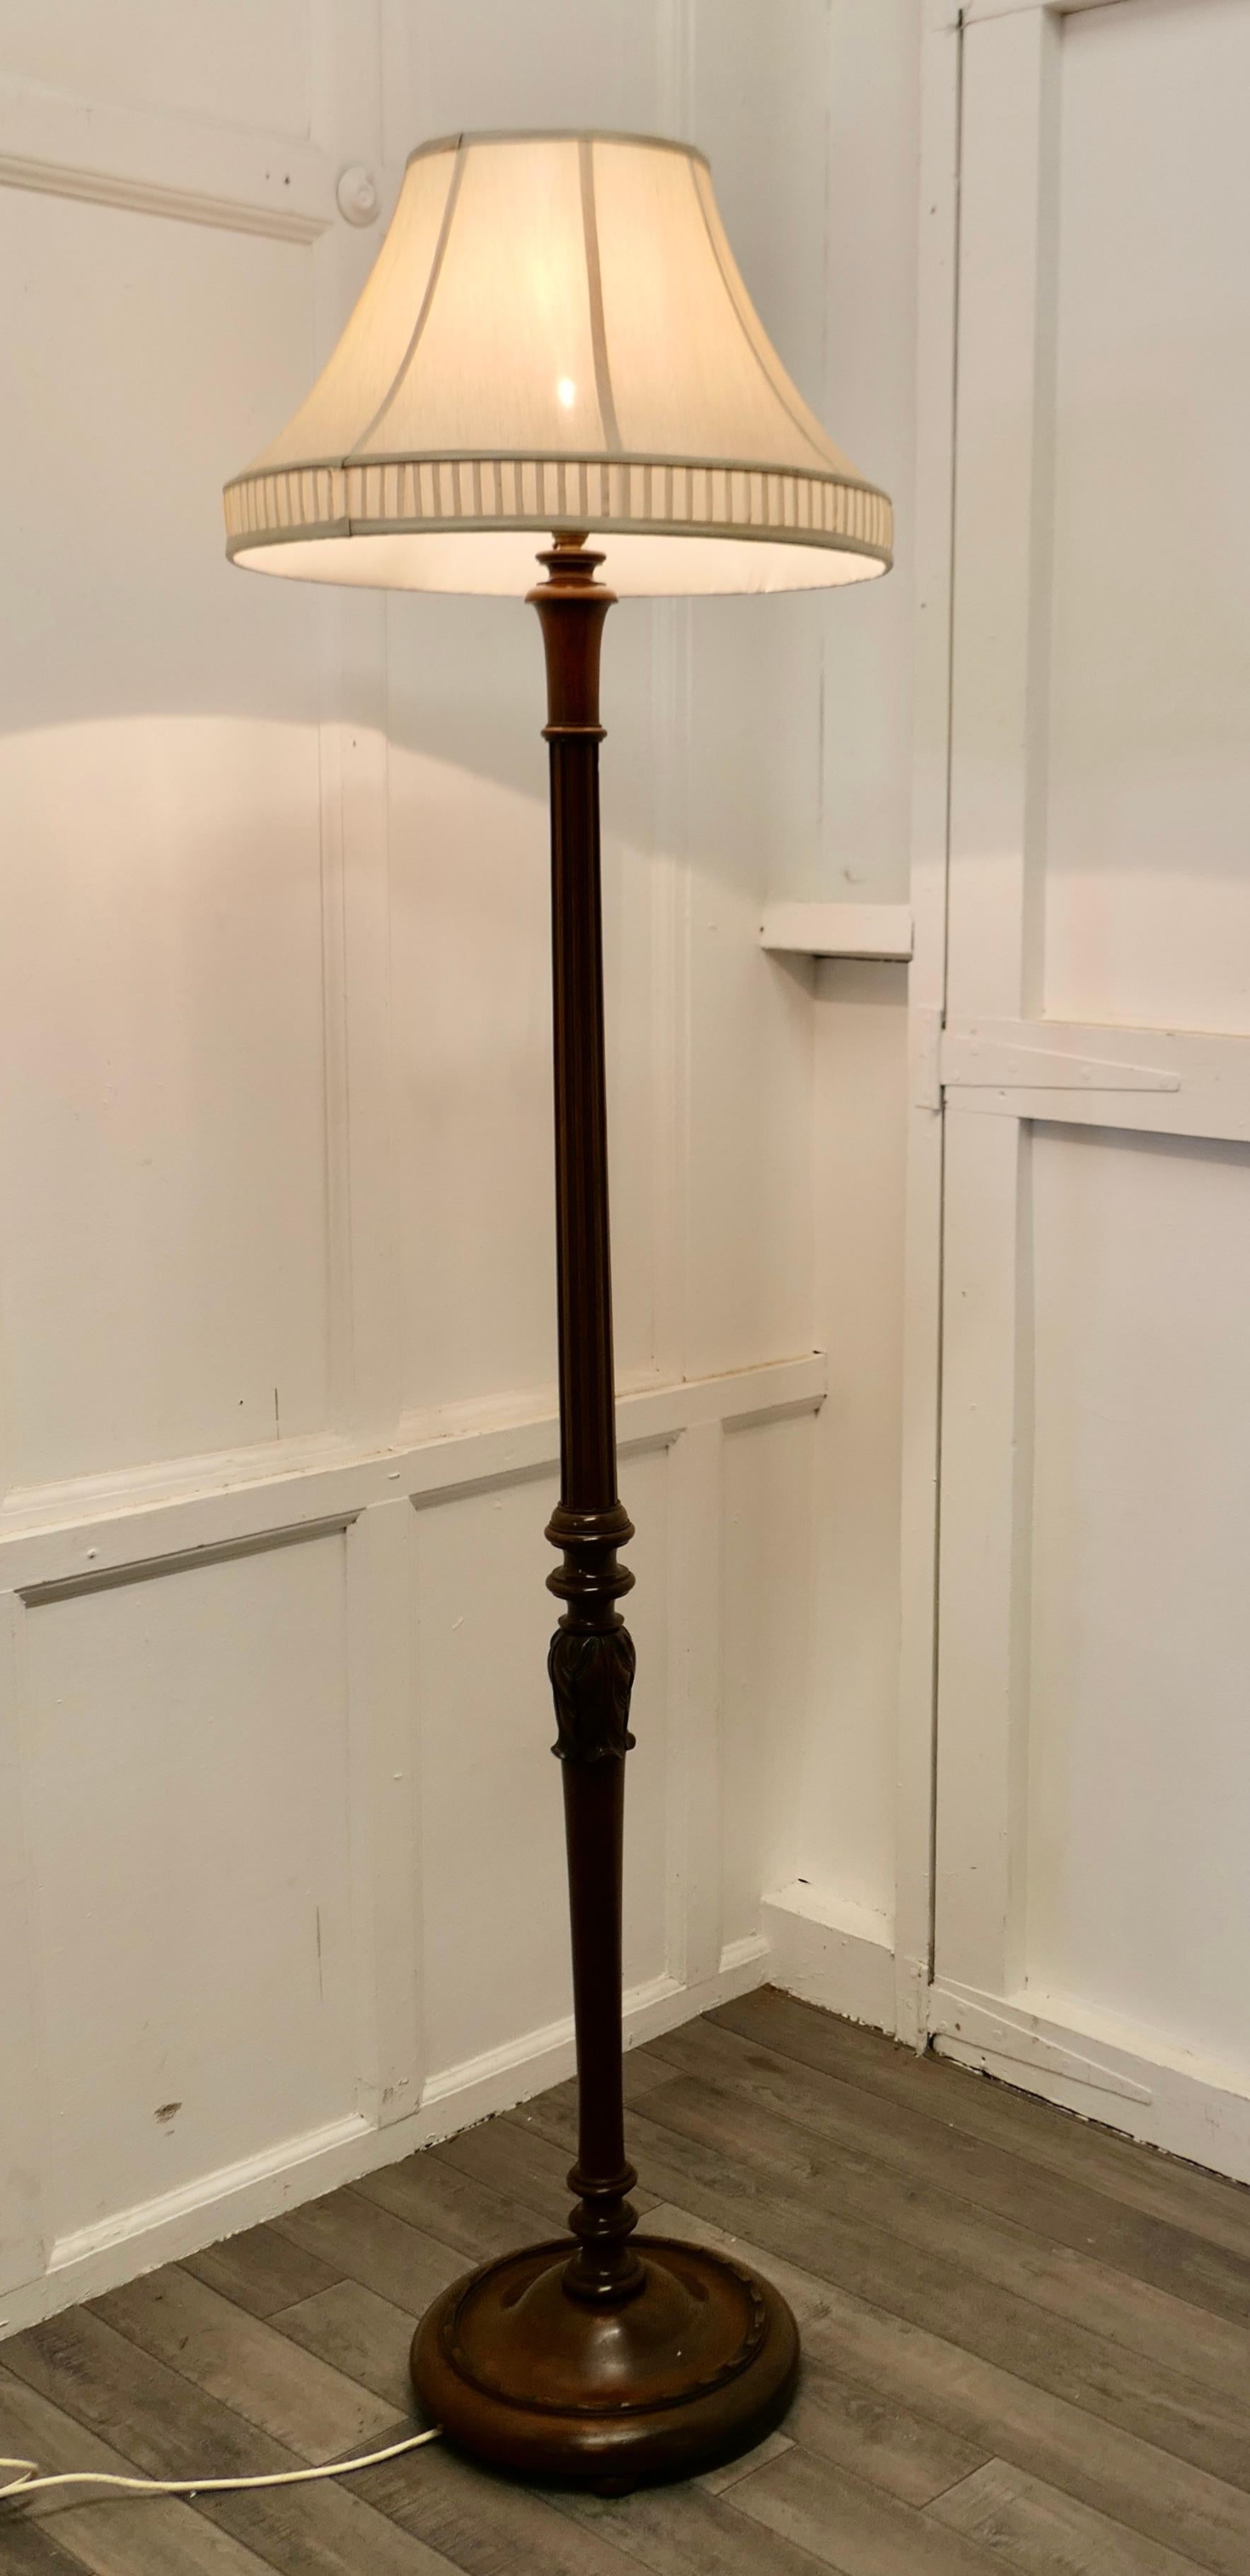 Carved Walnut Floor Standing or Standard Lamp

This is a very attractive good quality piece in figured walnut, the lamp stands on a beautifully carved walnut base and has an attractively turned and reeded upright column
The lamp is in good